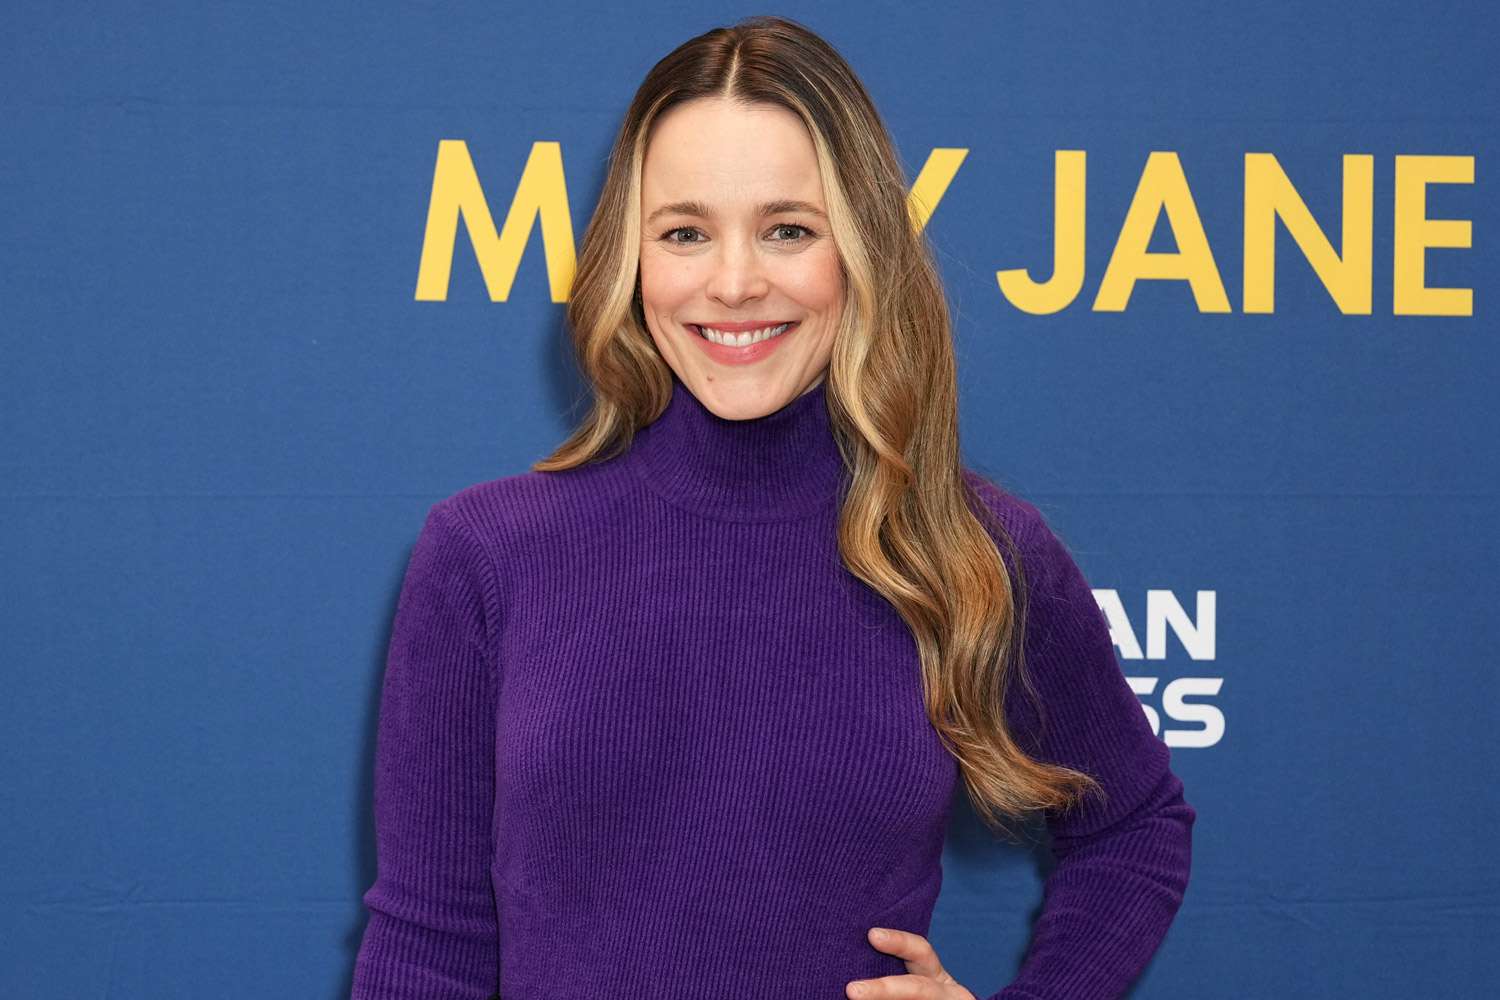 Rachel McAdams attends a photo call for the new Manhattan Theatre Club Broadway play "Mary Jane" at Manhattan Theatre Club Rehearsal Studios on March 7, 2024